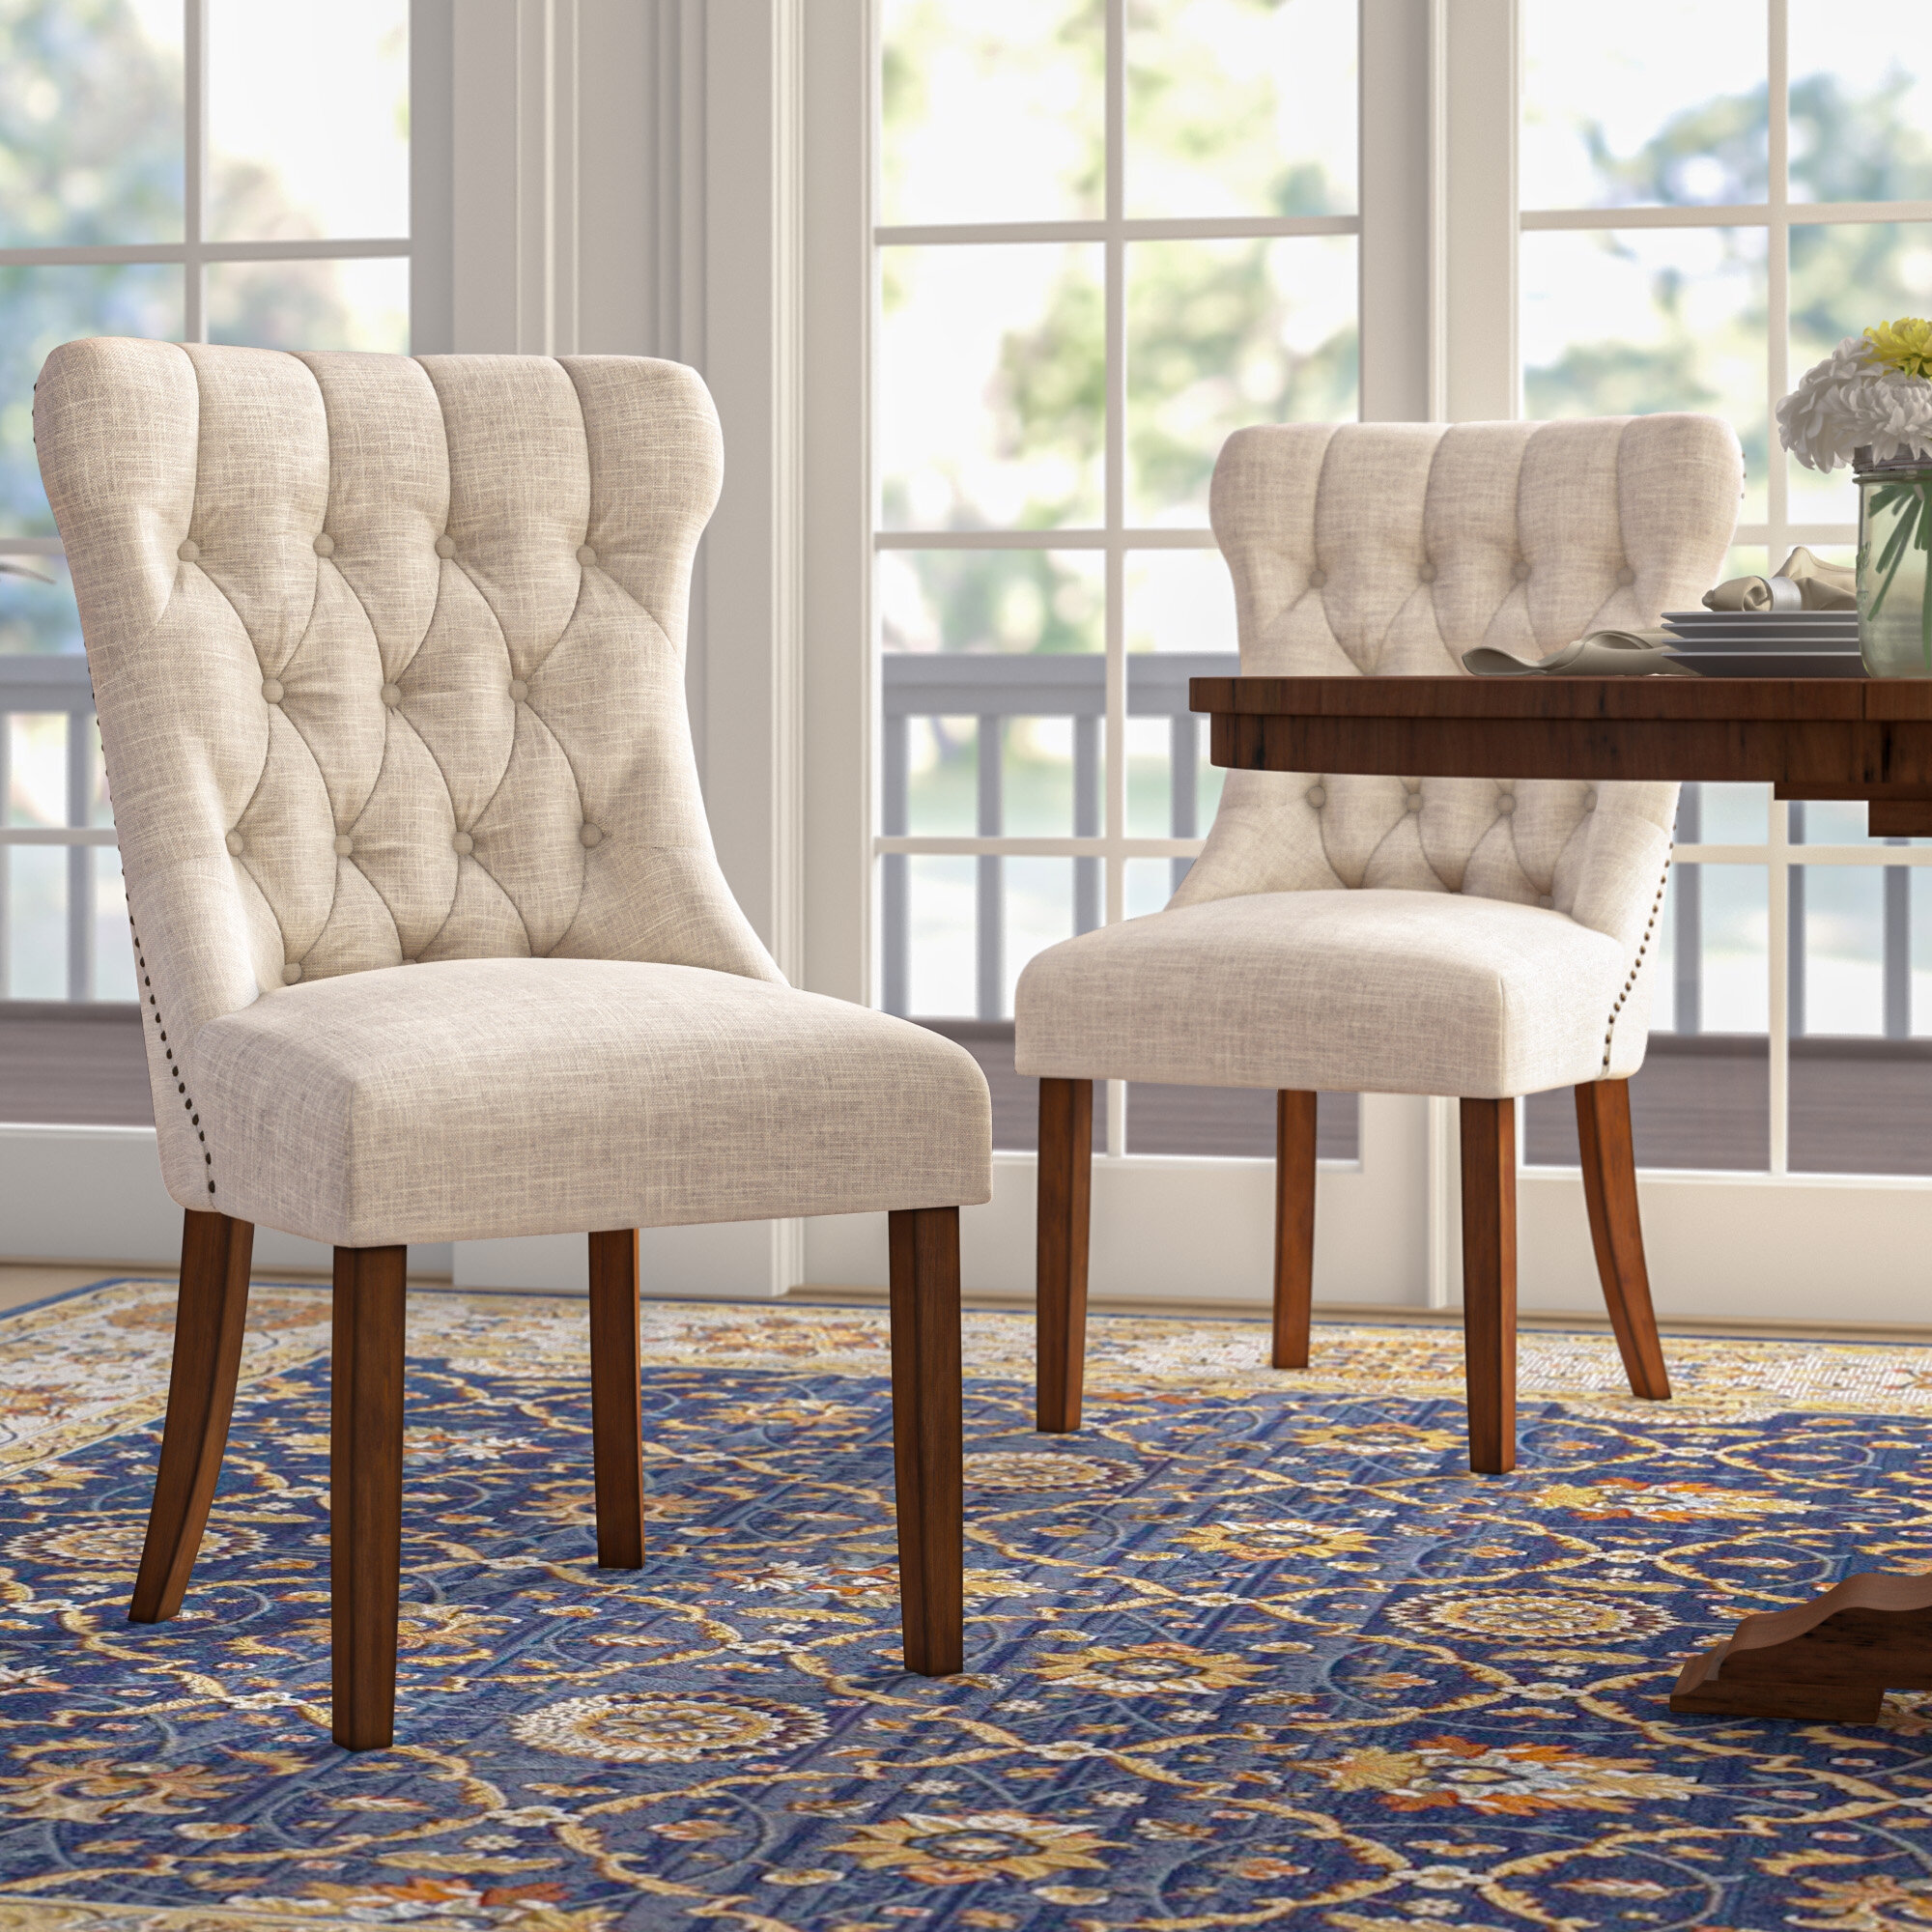 Wayfair Dining Chairs Set Of 4 / Wayfair Dining Chairs Set Of 4 Off 74